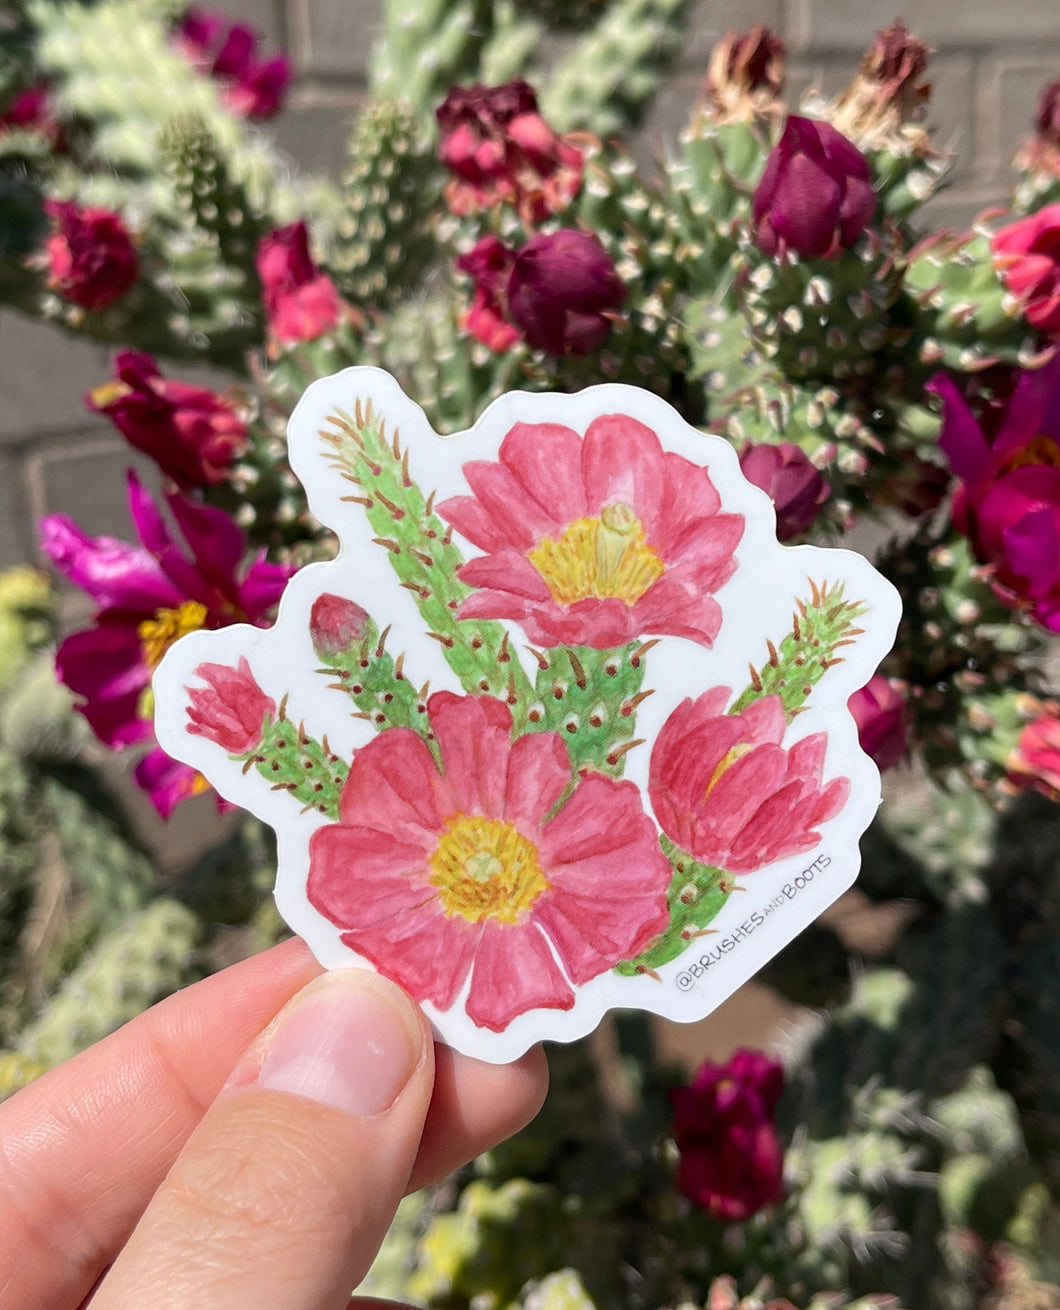 Vinyl sticker of a watercolor painting of a pink flowered staghorn cholla found in the Sonoran Desert